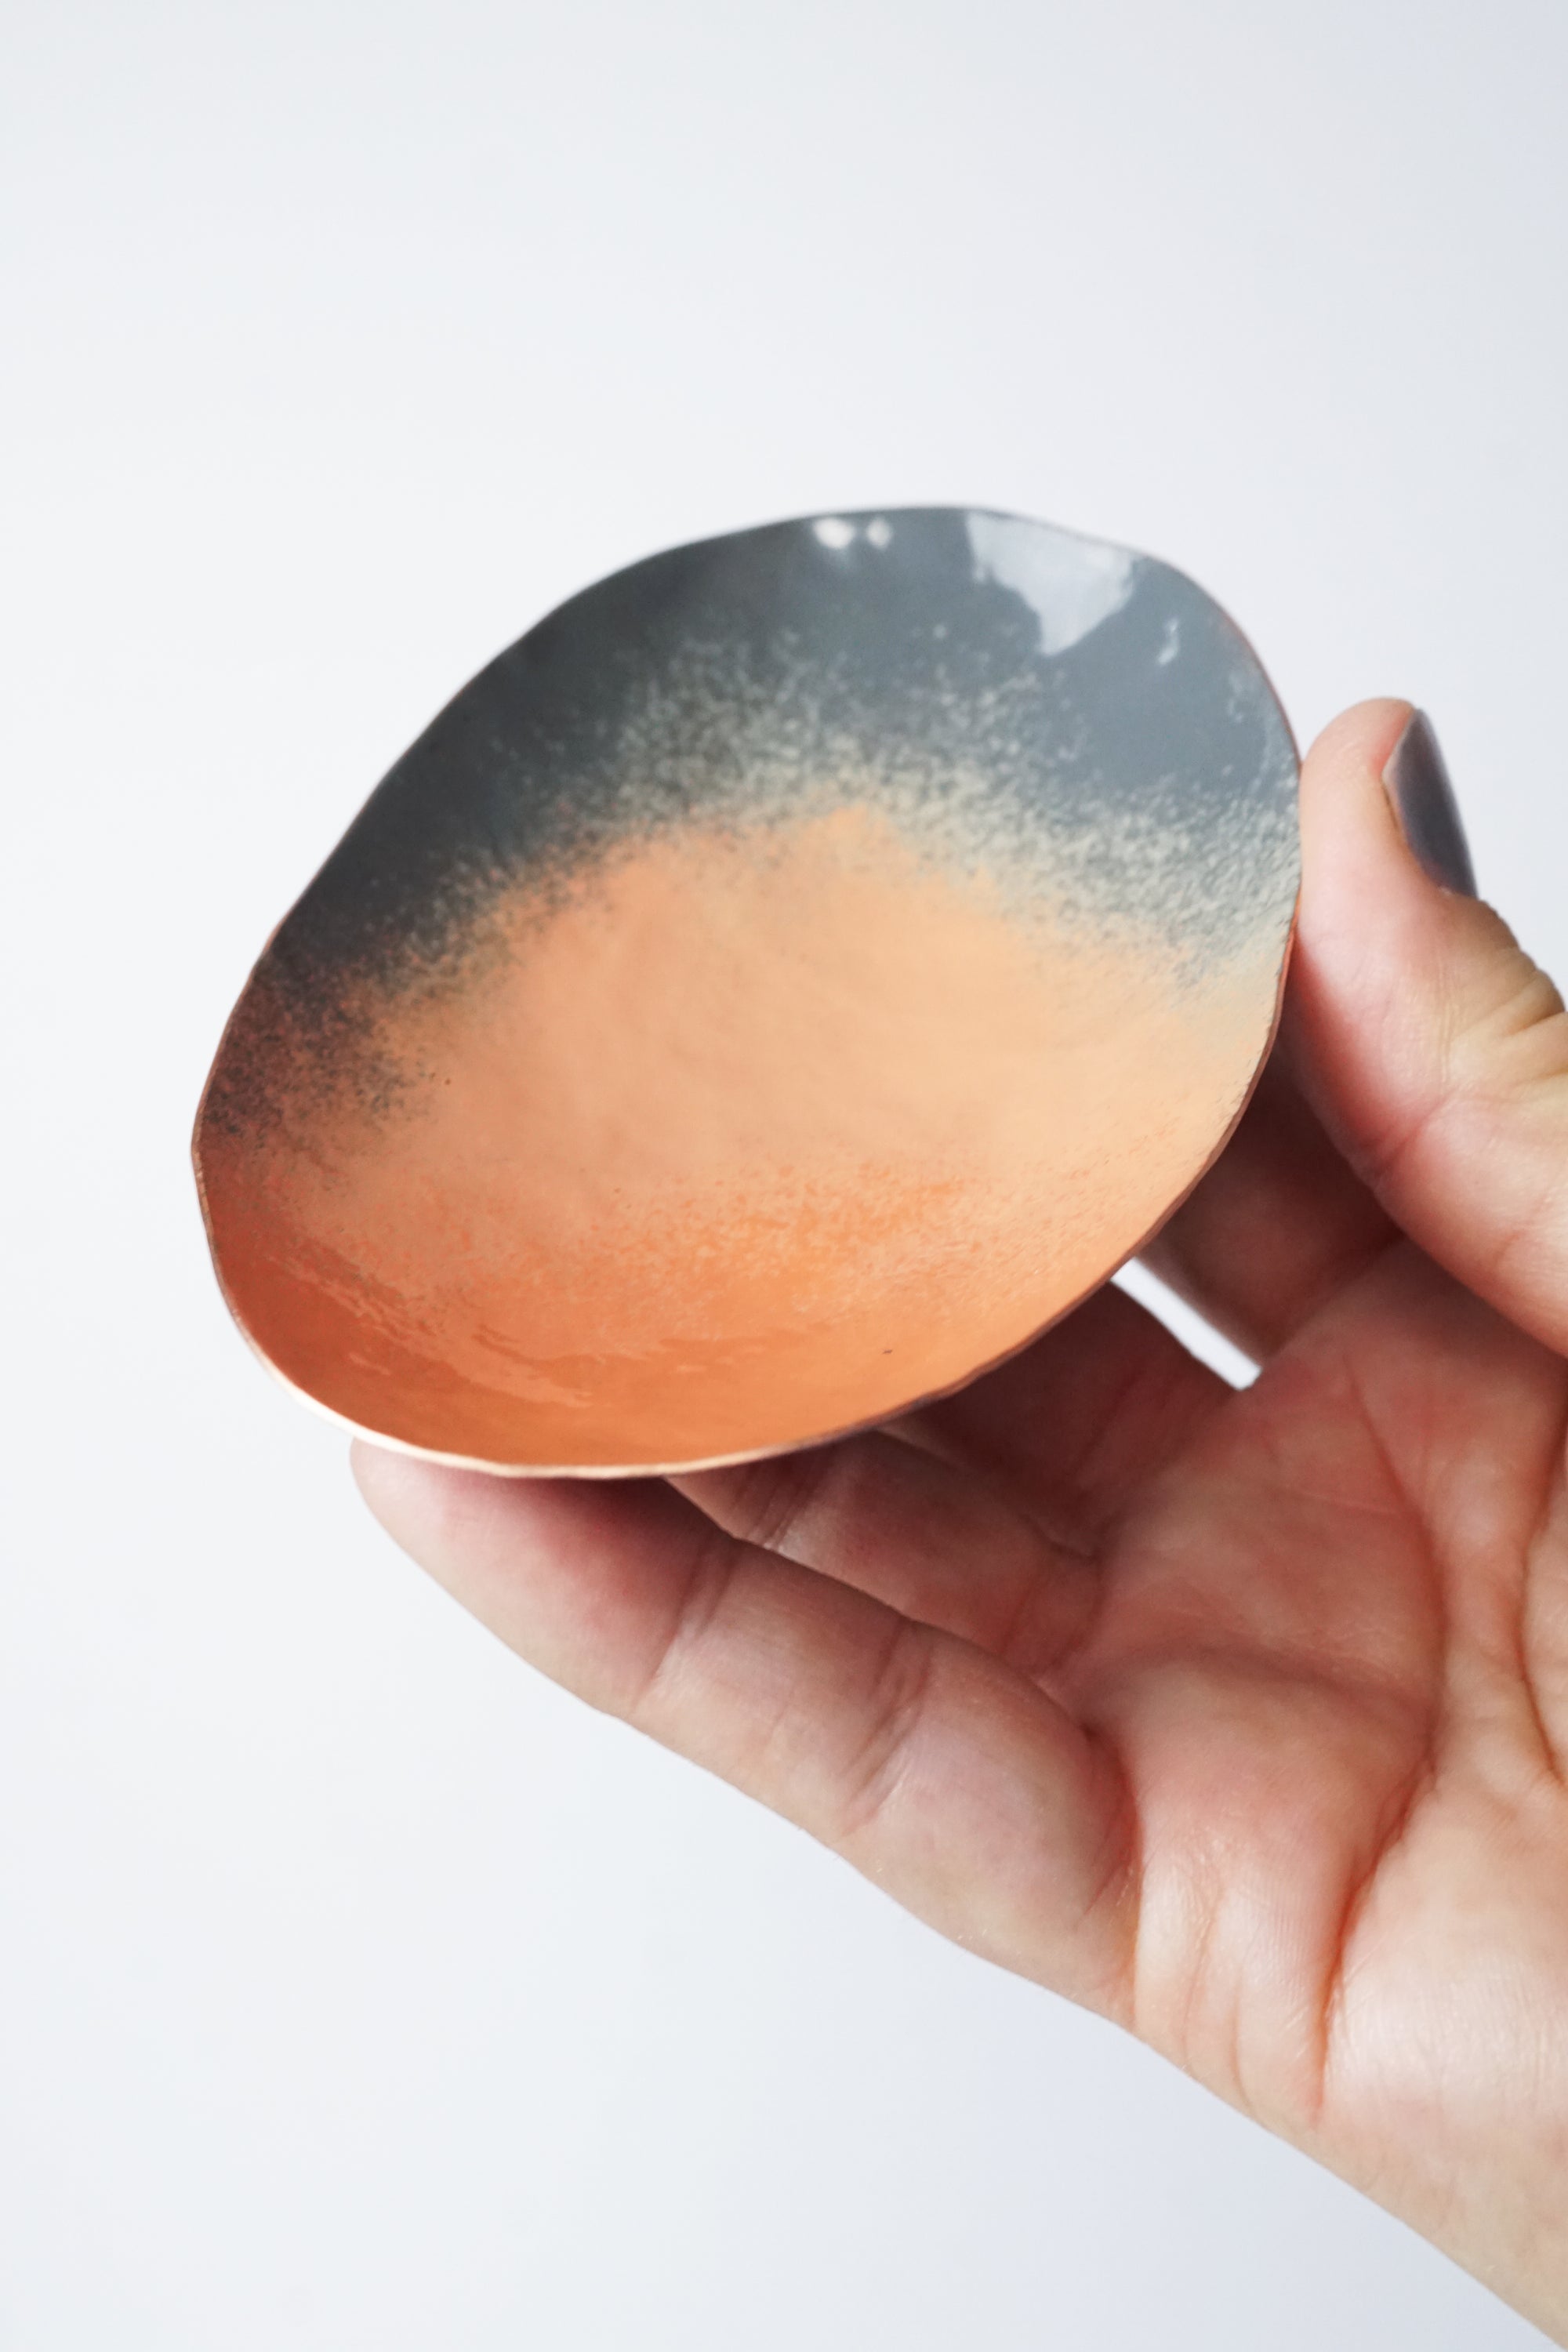 Oval Copper Dish in Blush and Grey